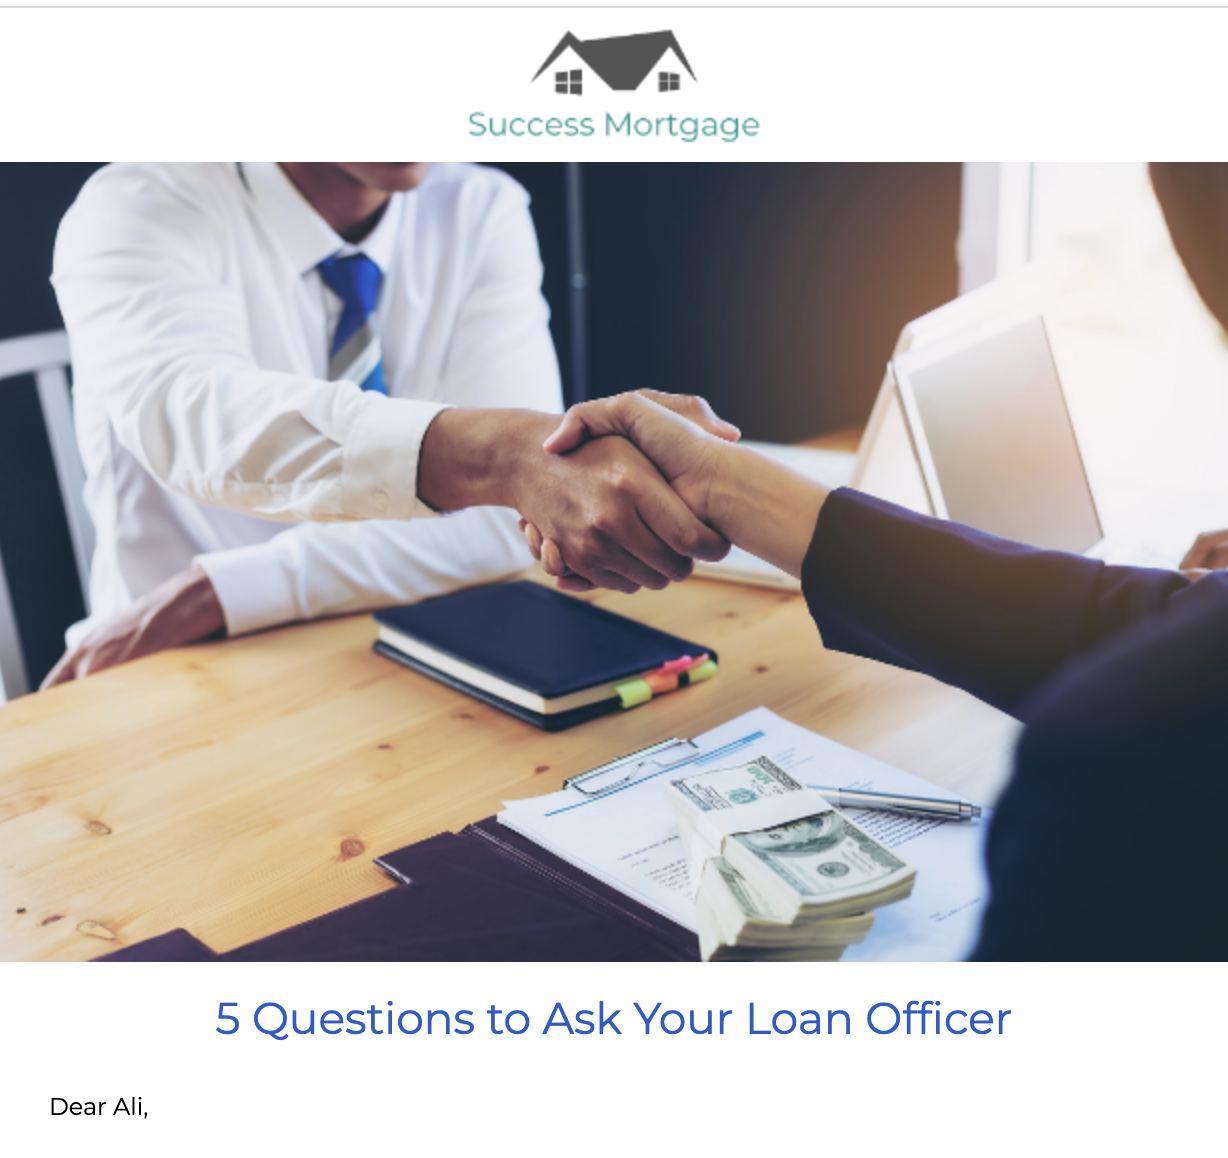 5 Questions to Ask Your Loan Officer